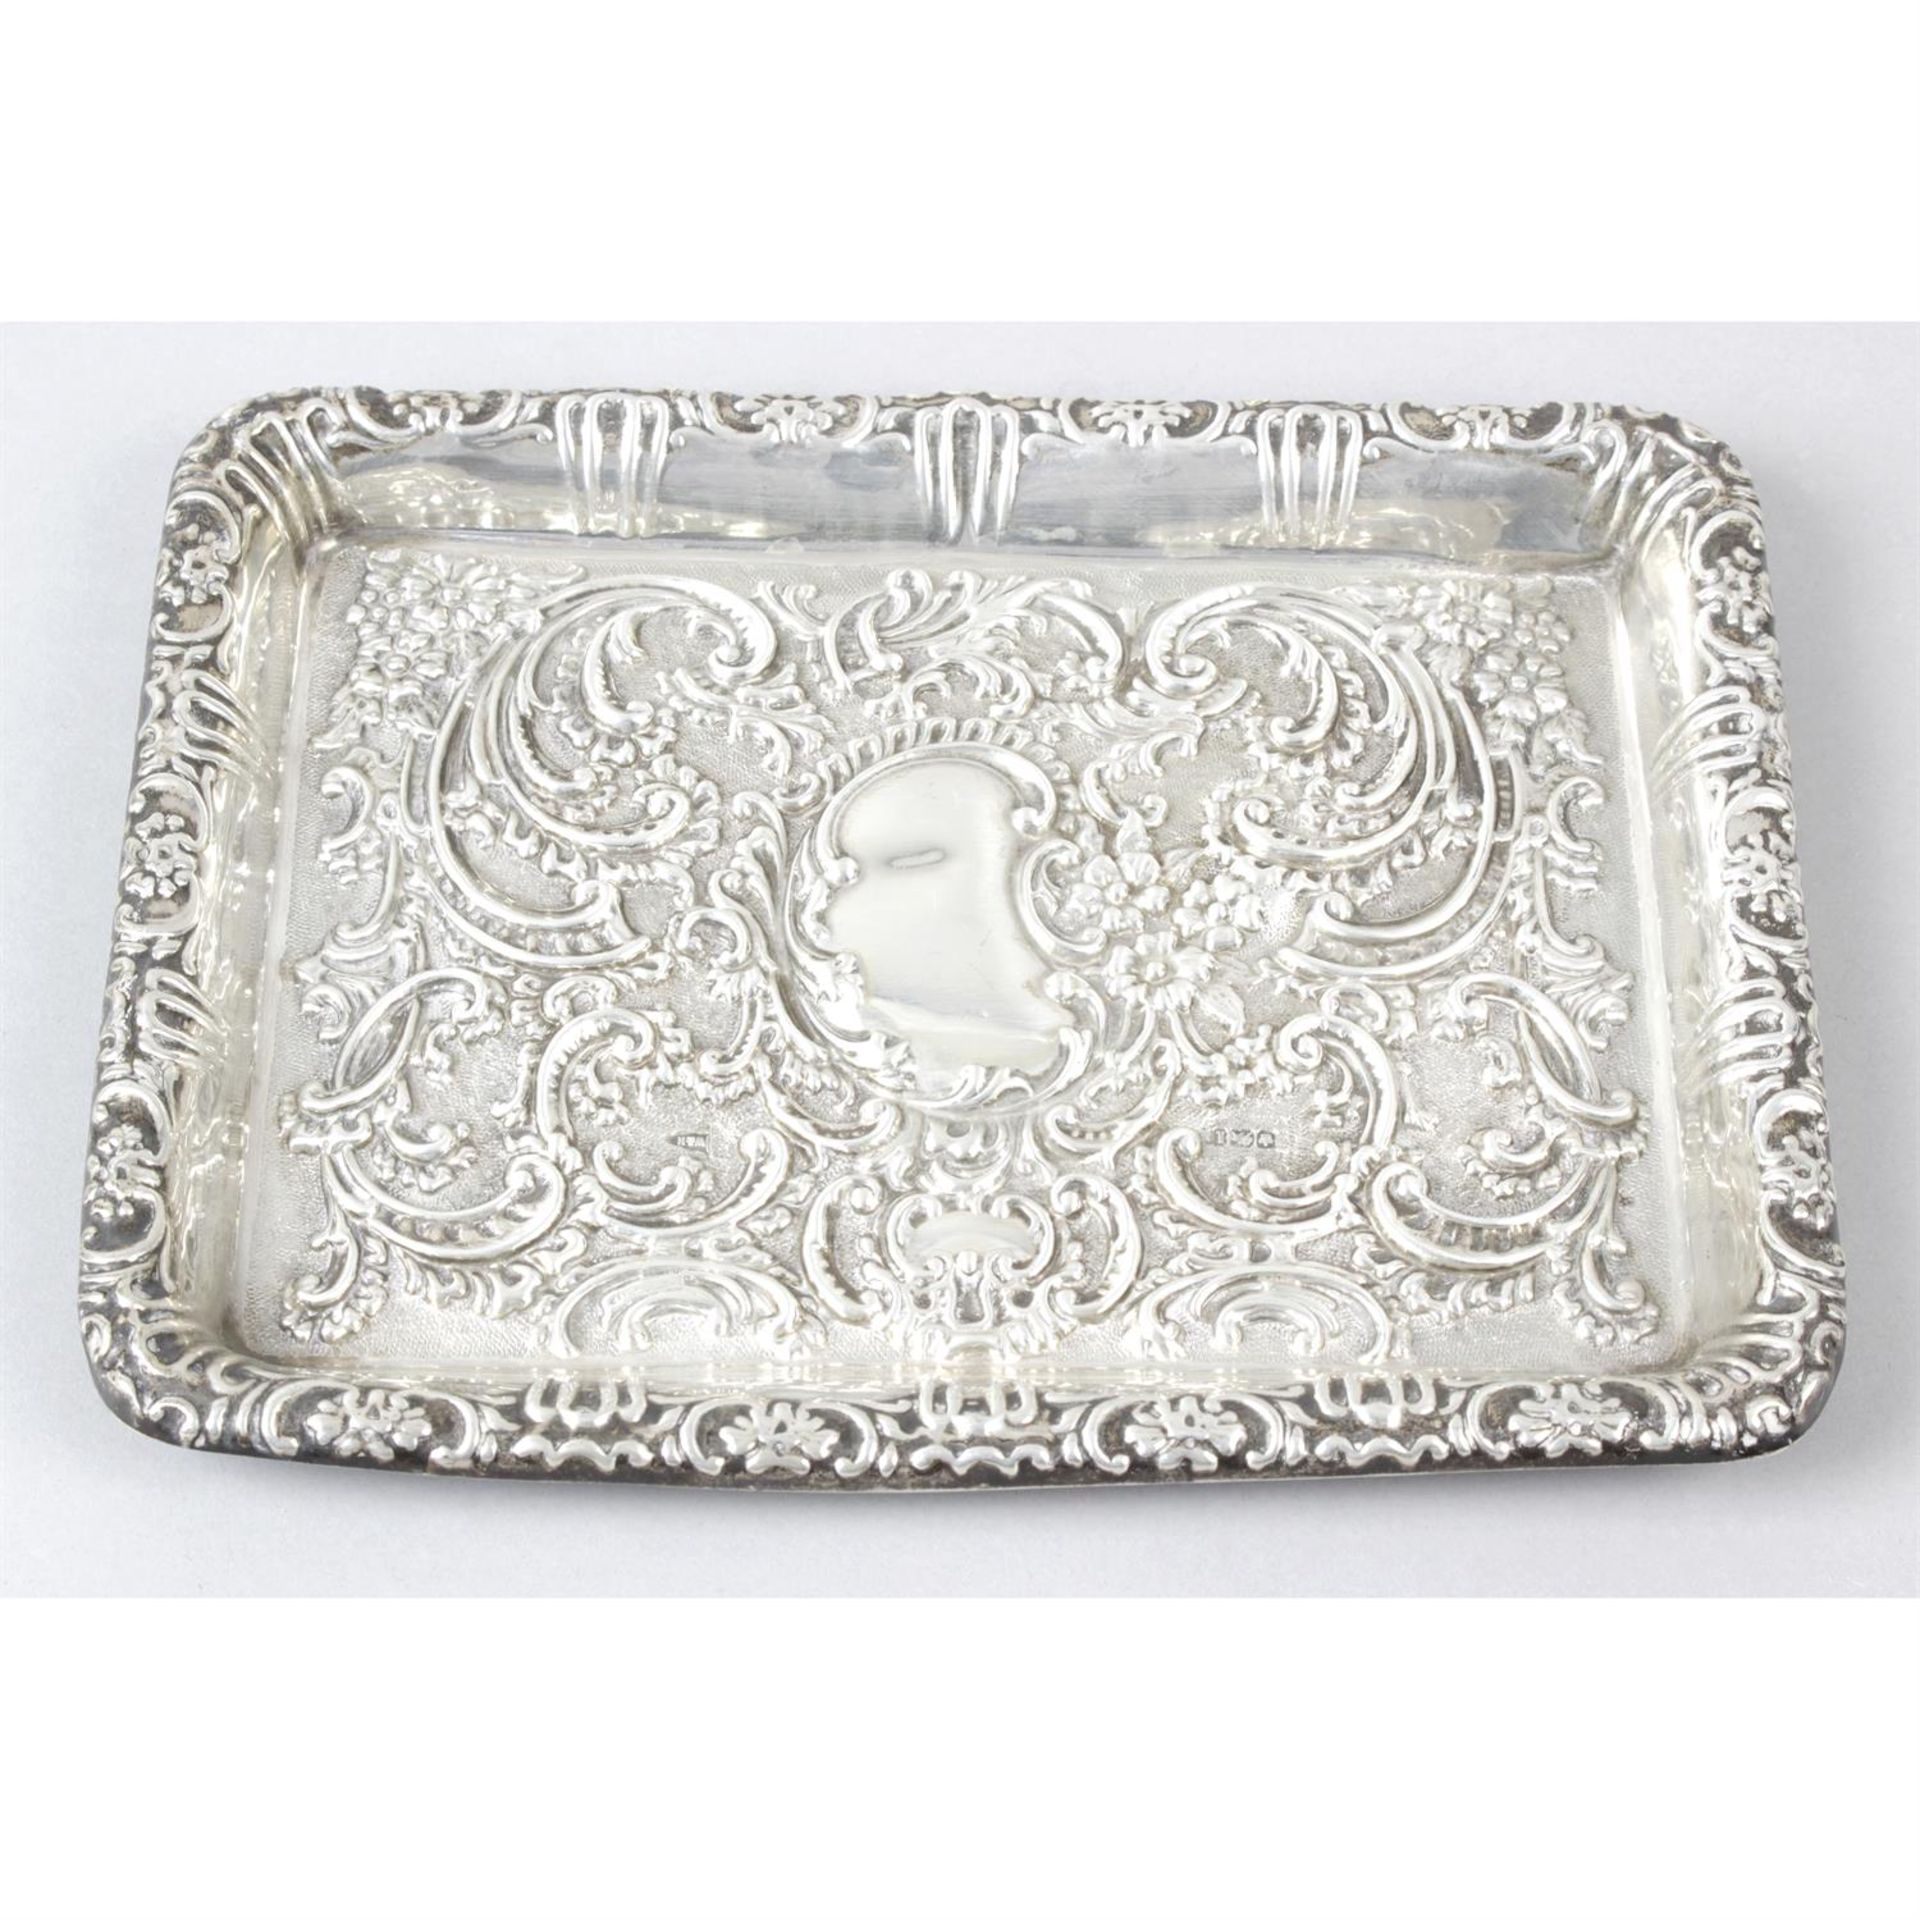 An Edwardian silver embossed dressing table tray by Walker & Hall.